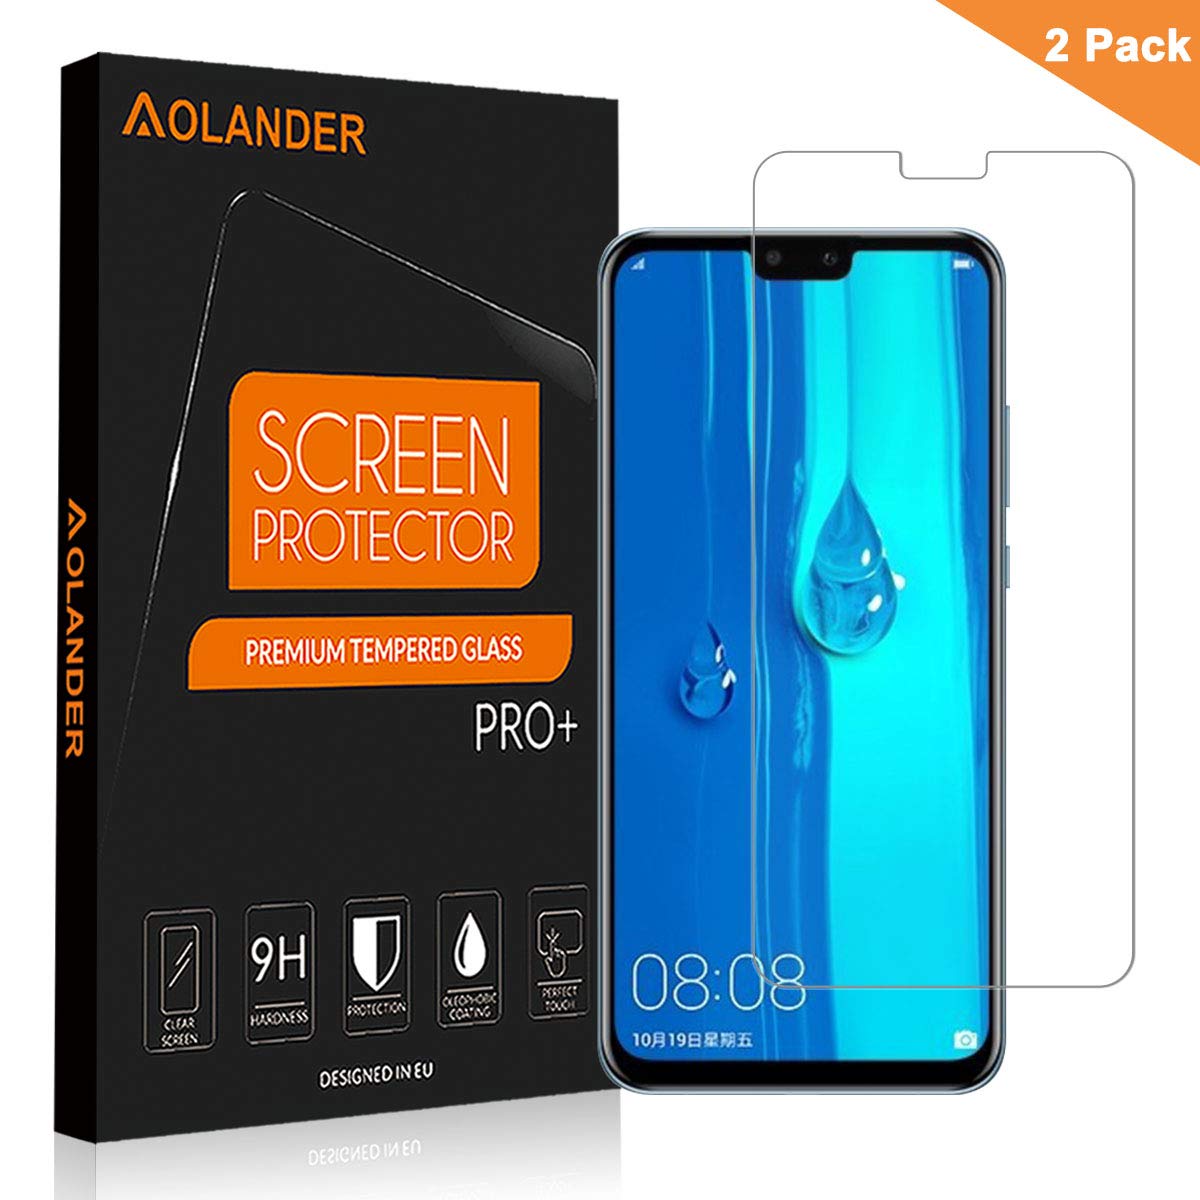 UNEXTATI Screen Protector Film HD Clear Tempered Glass Film for Huawei Y9 2019 Tempered Glass Screen Protector Compatible with Y9 2019 2 Pack 